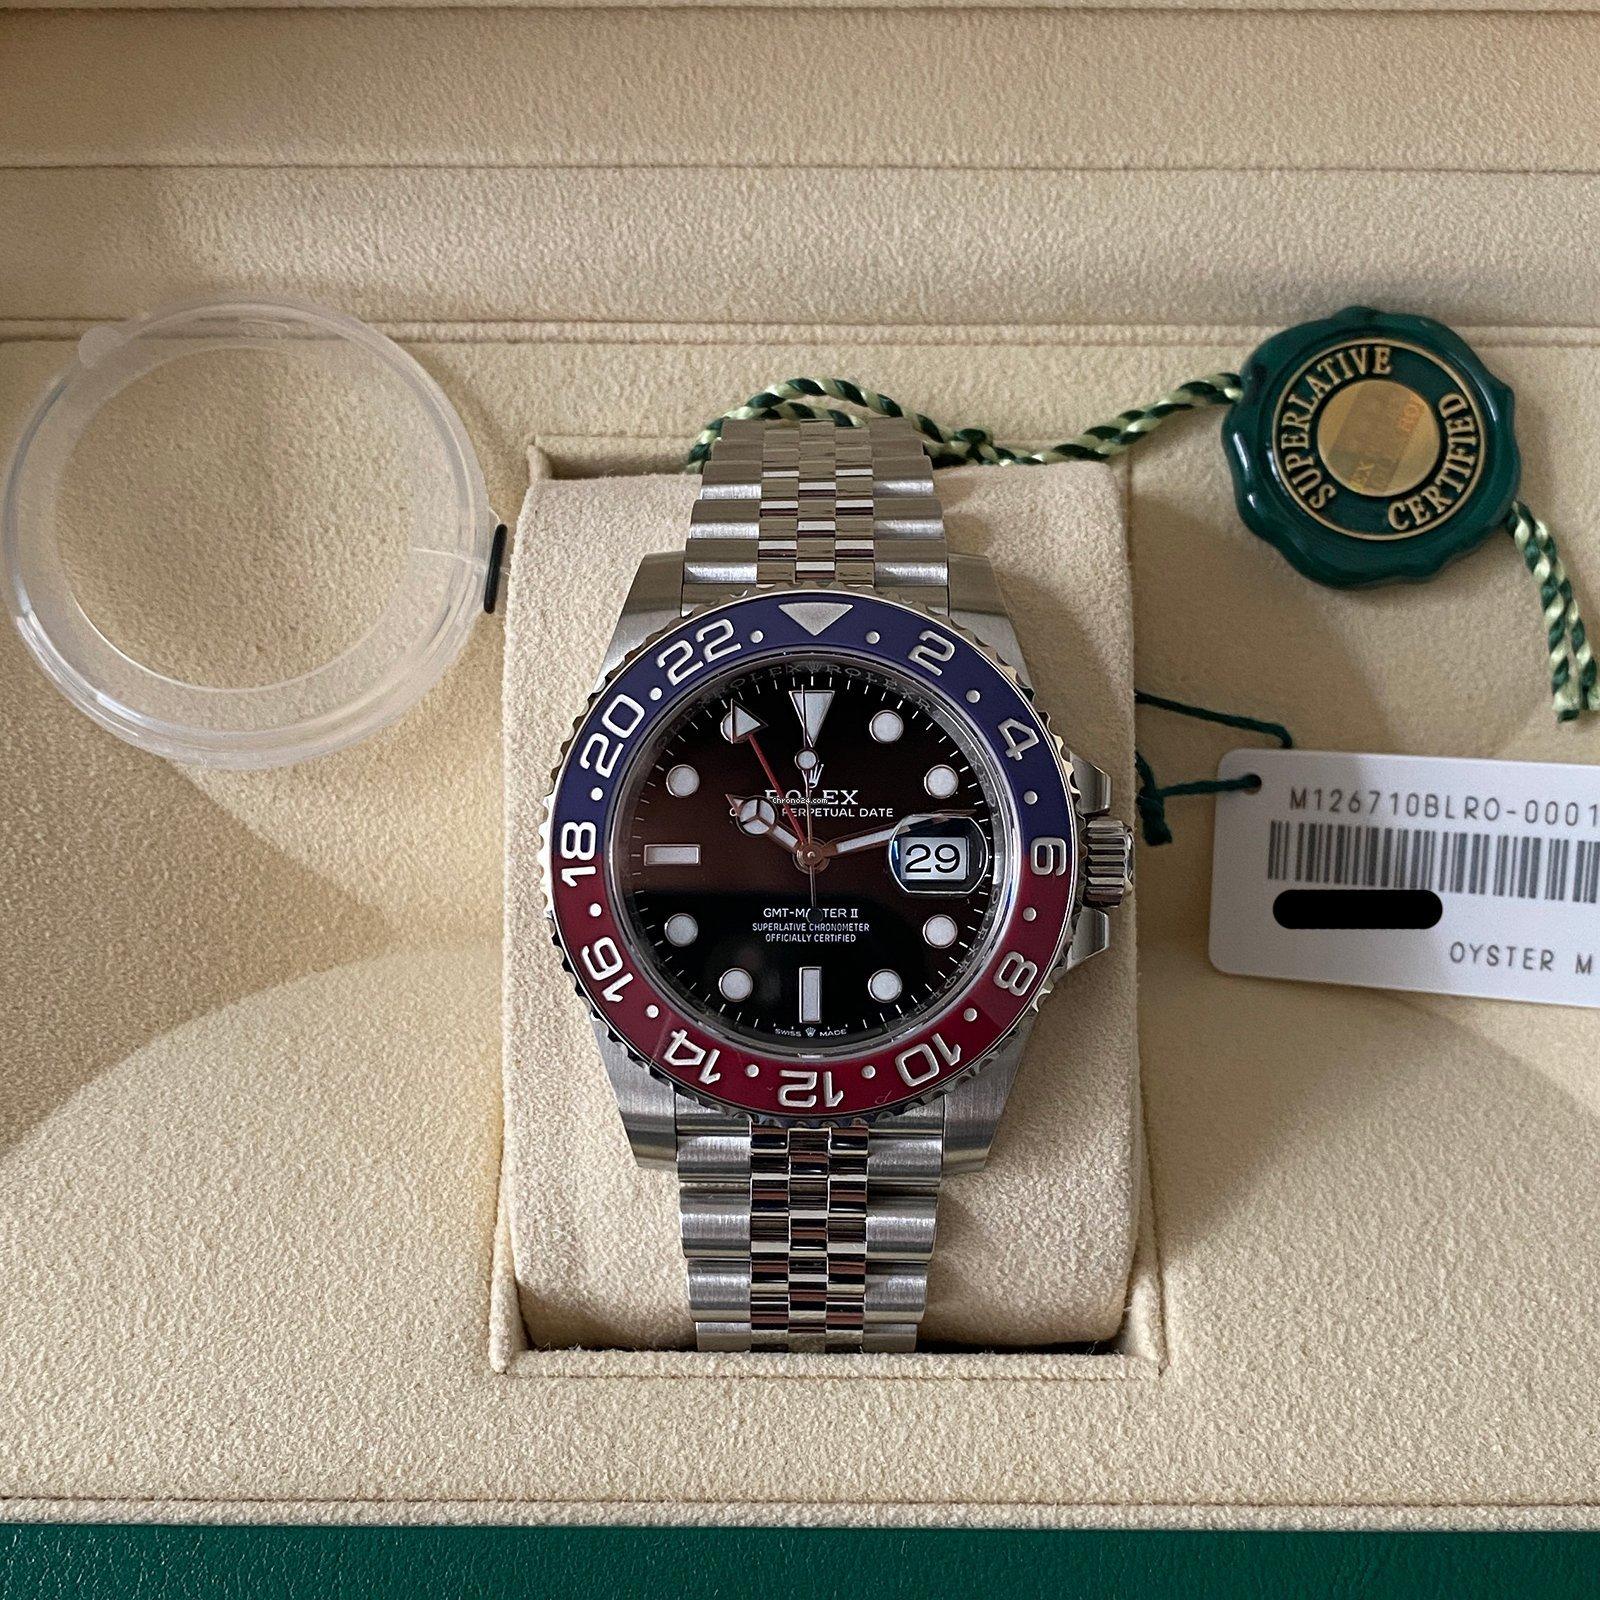 The watch is complete with the original Rolex Box and Warranty card dated 2022.
Only Direct Payments (Wire Transfers) are acceptable for this item.
The Oyster Perpetual GMT-Master II in Oystersteel with a Jubilee bracelet.

Reference